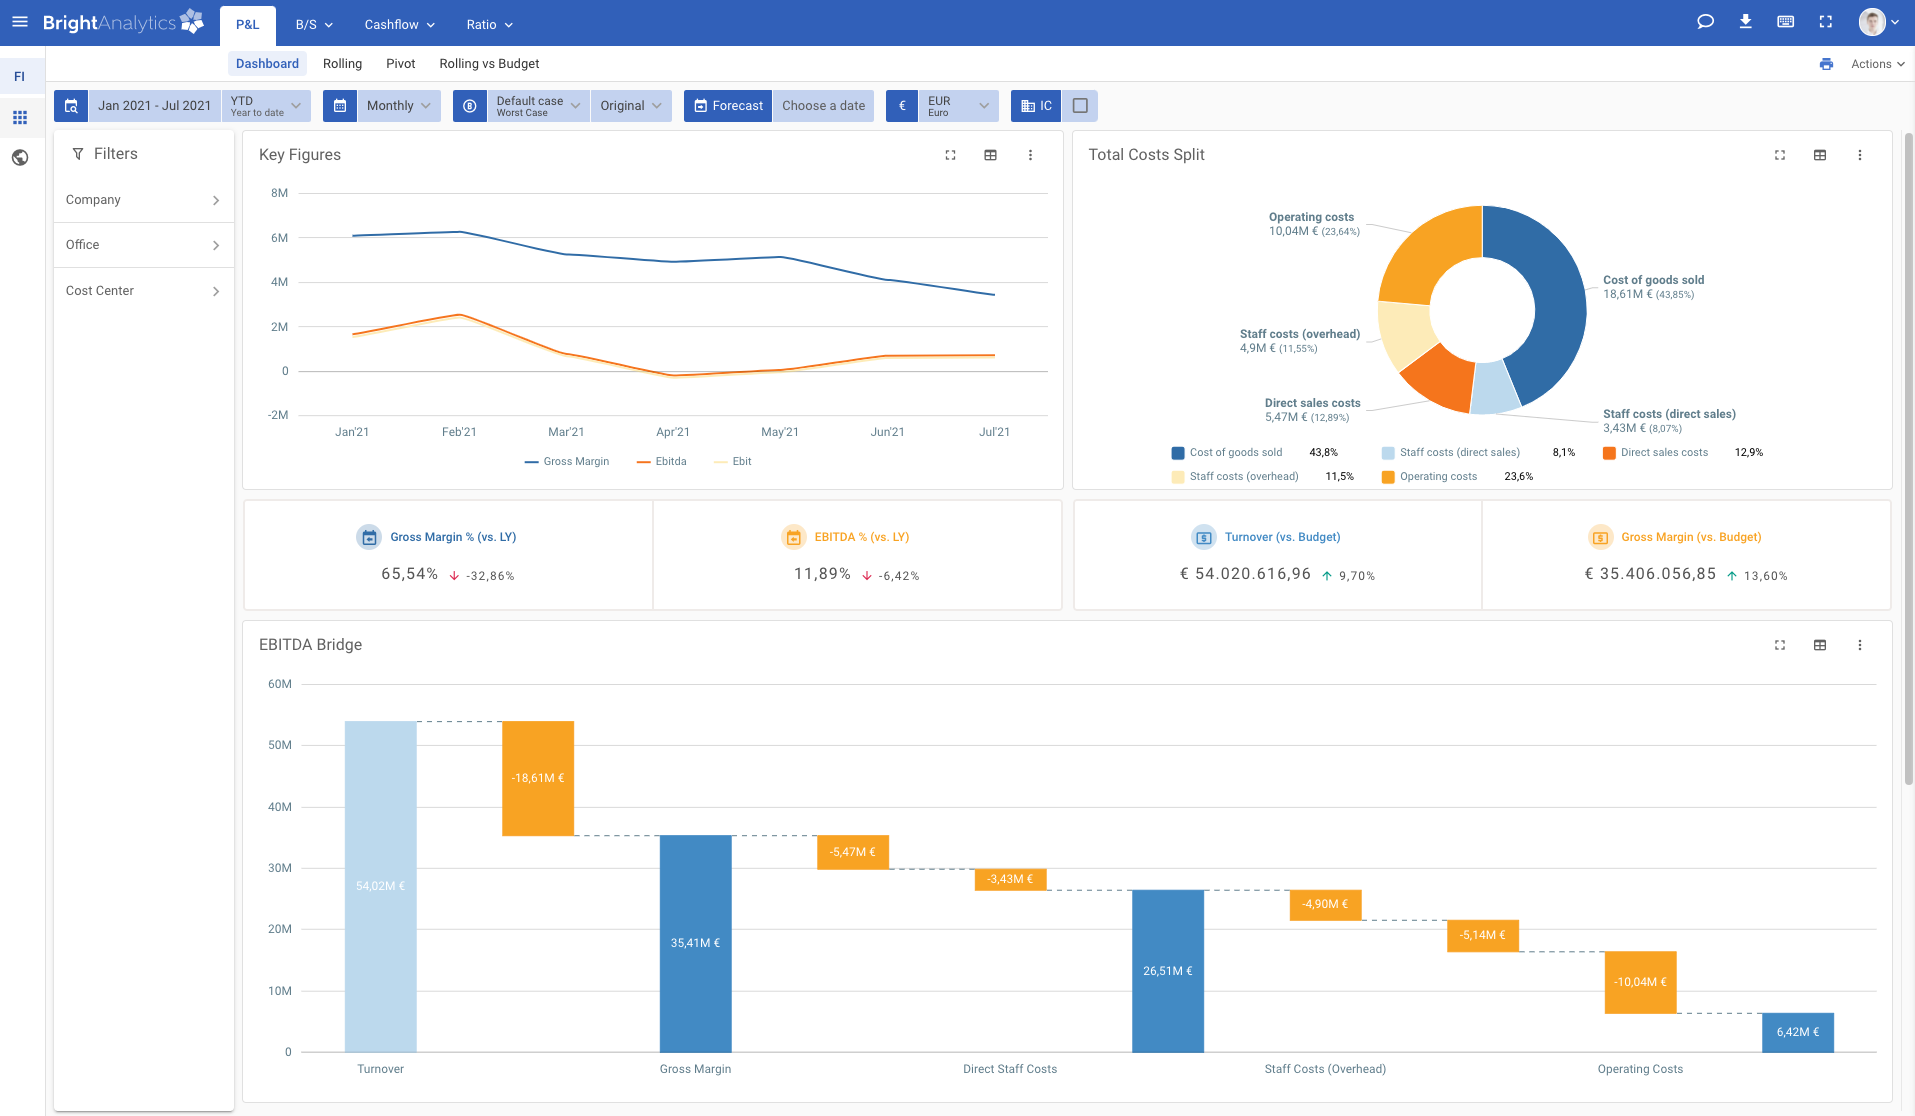 Exopen alternative - Intuitive and user-friendly interface of BrightAnalytics